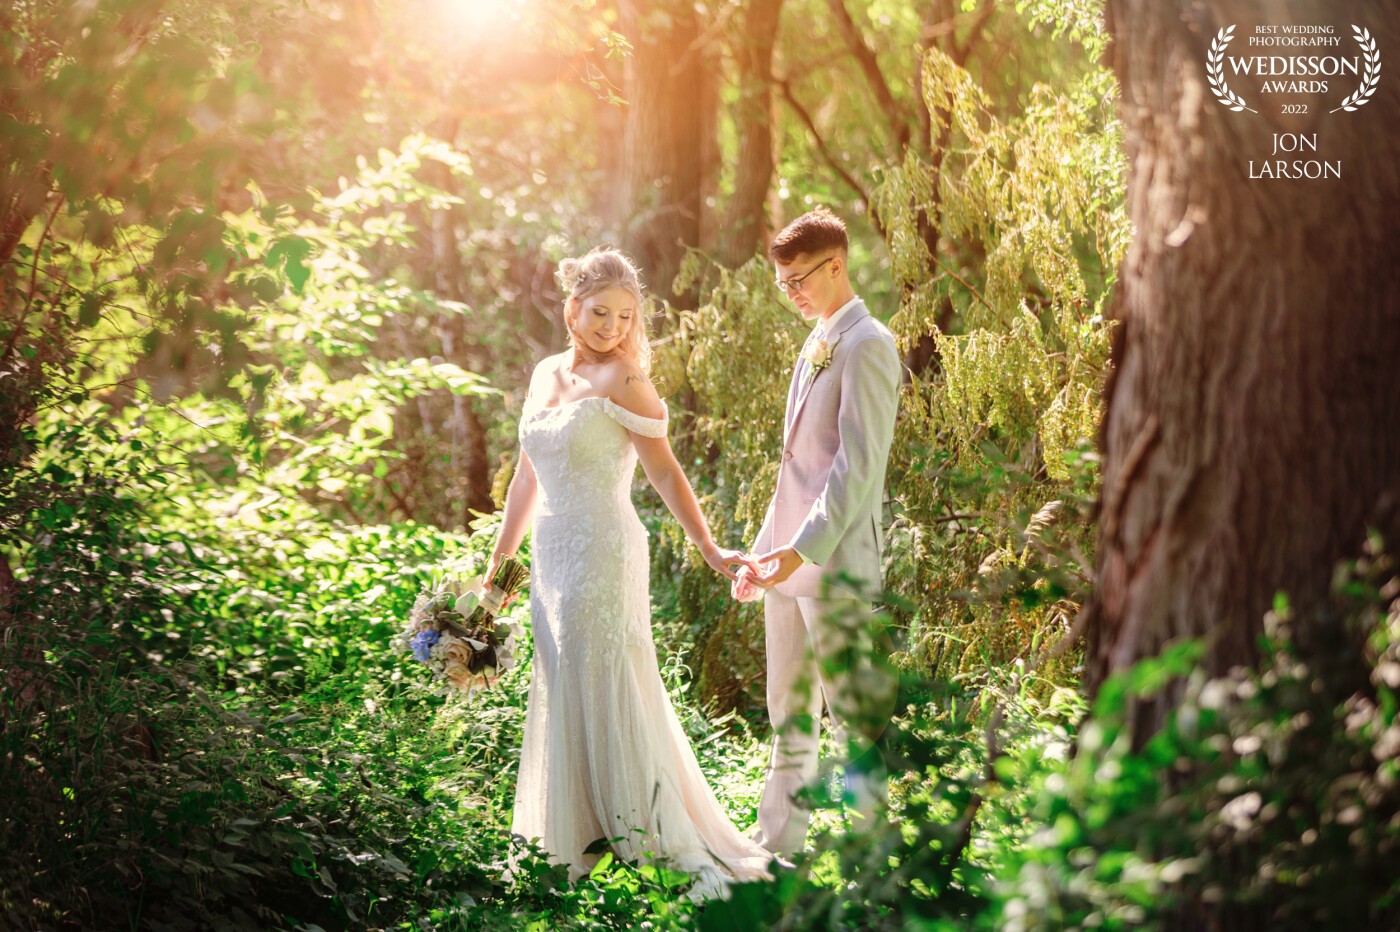 With a path worn out, I asked Ben and Miranda to go play in the light that was piercing through the trees at the end of this magical area.<br />
Asking the bride and groom to have a moment together….This is what they gave me. It was one of those goosebump moments knowing I had just captured something special!